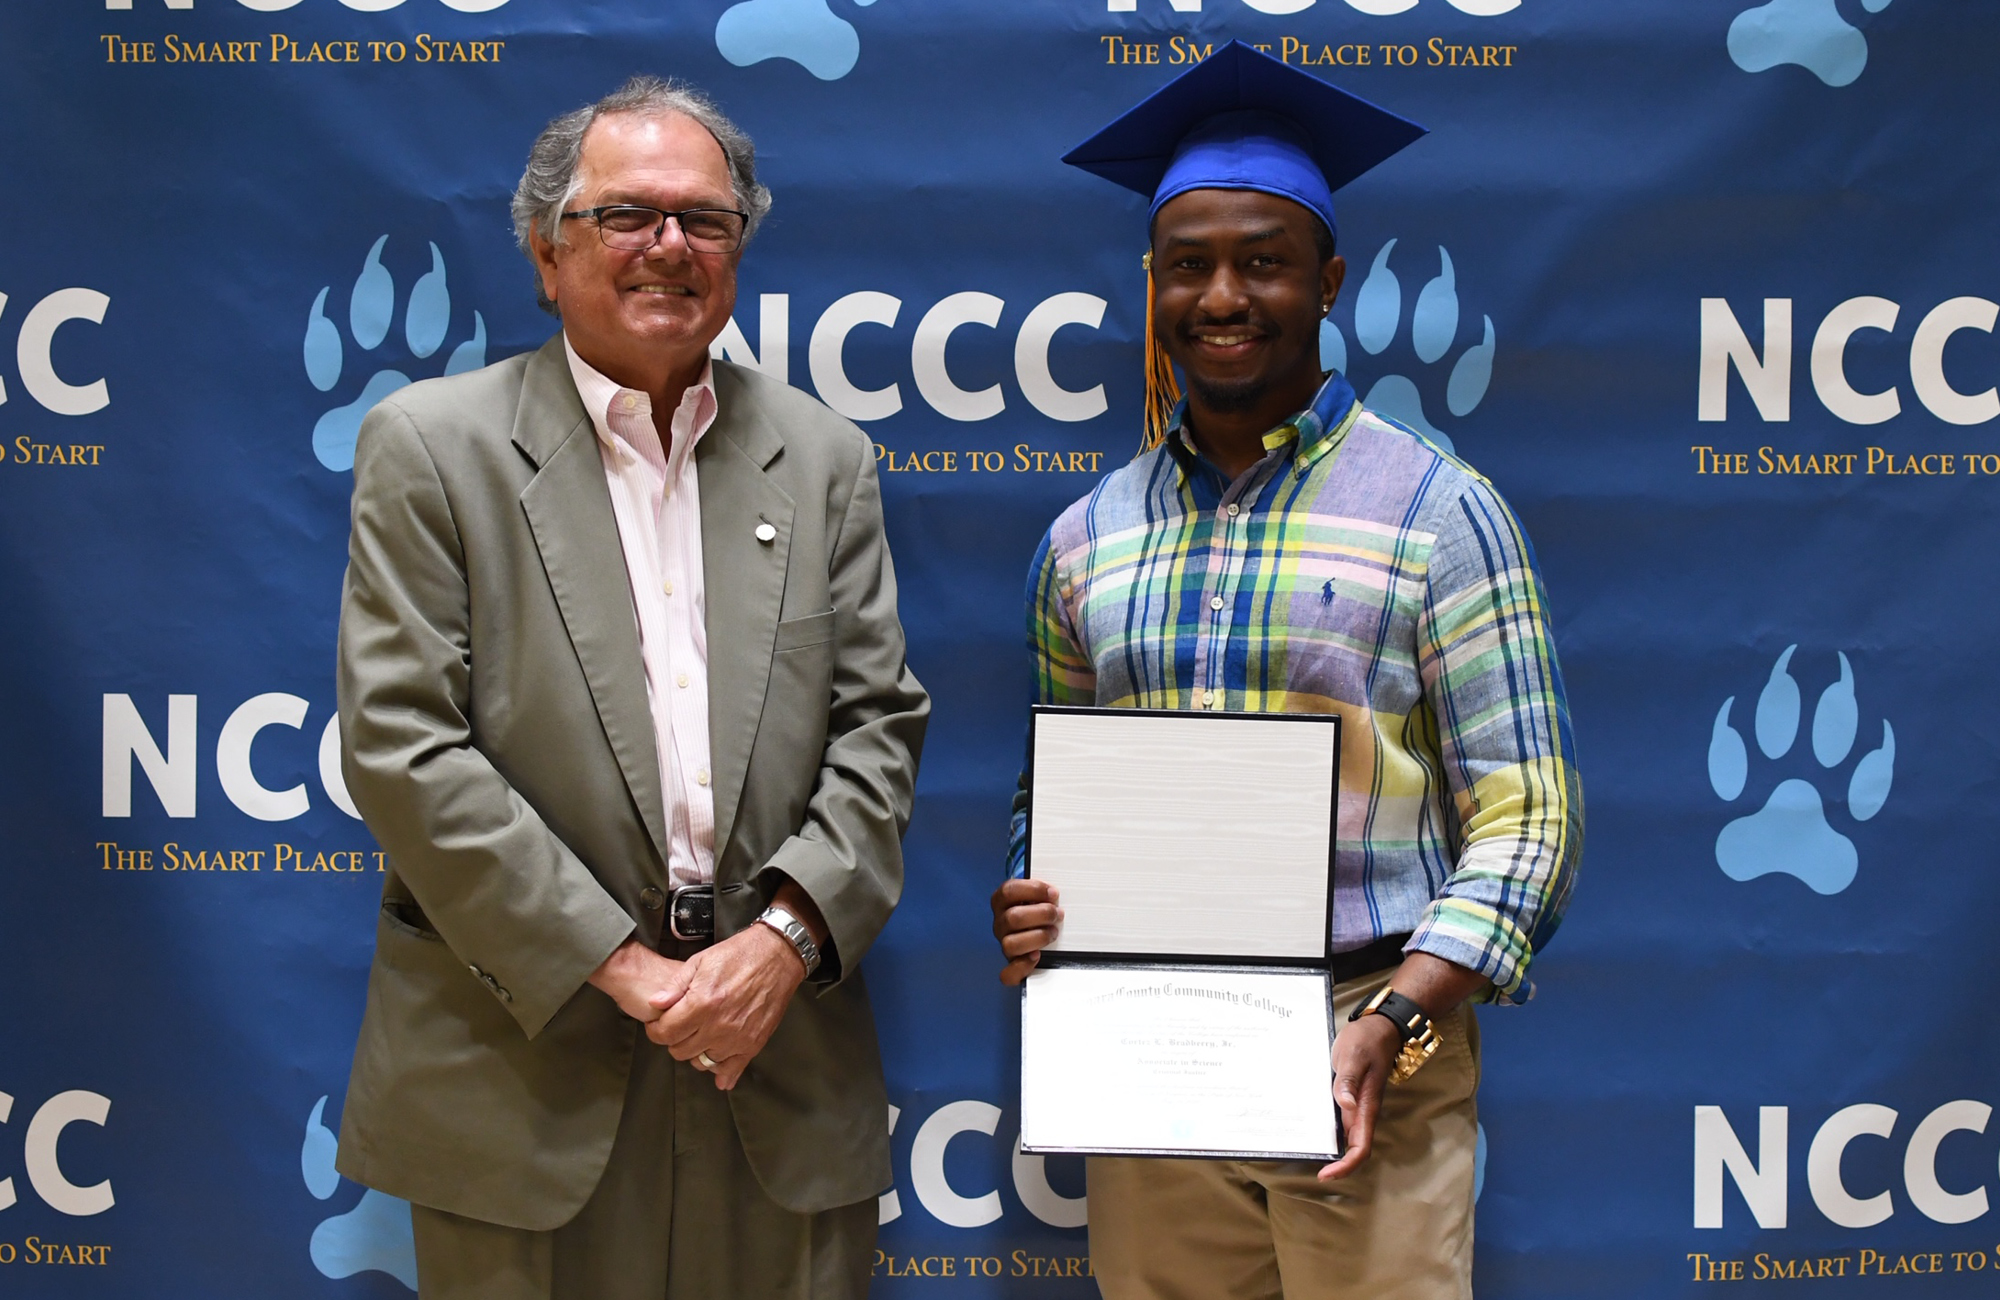 Pick-up or delivery? NCCC creates new experience for graduates